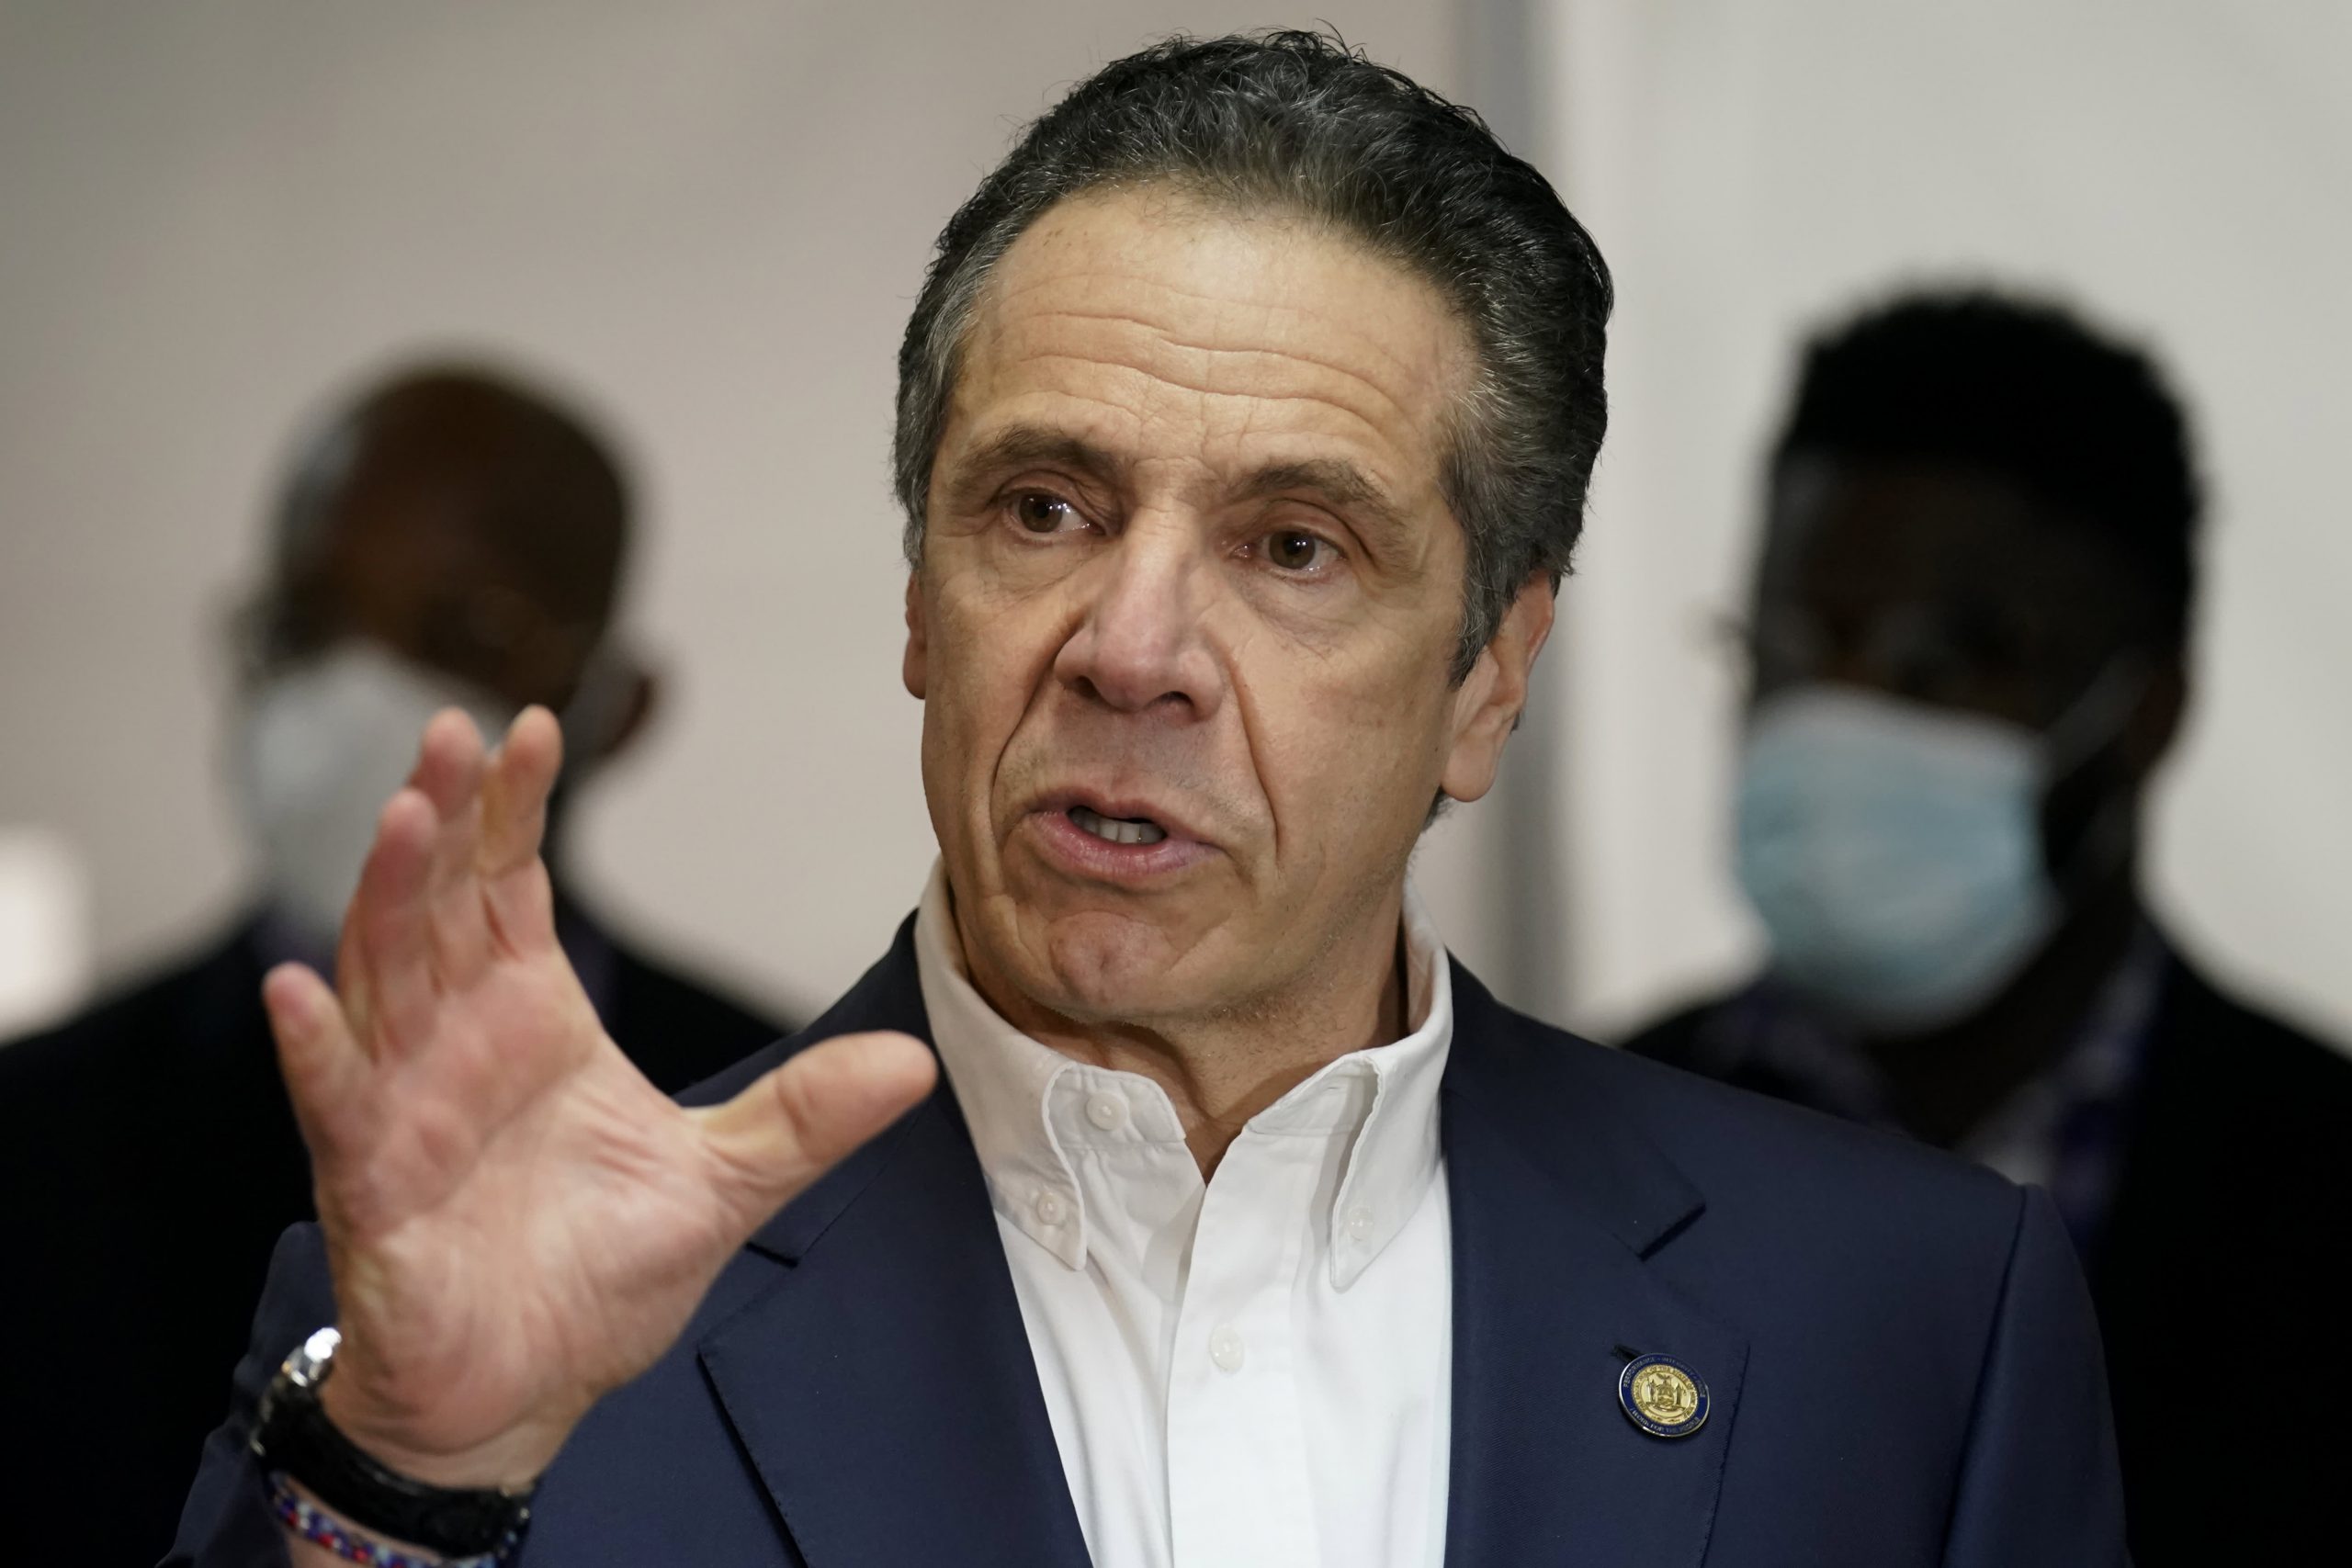 Cuomo ducks media again as sexual harassment scandal rages, talks Covid and baseball instead